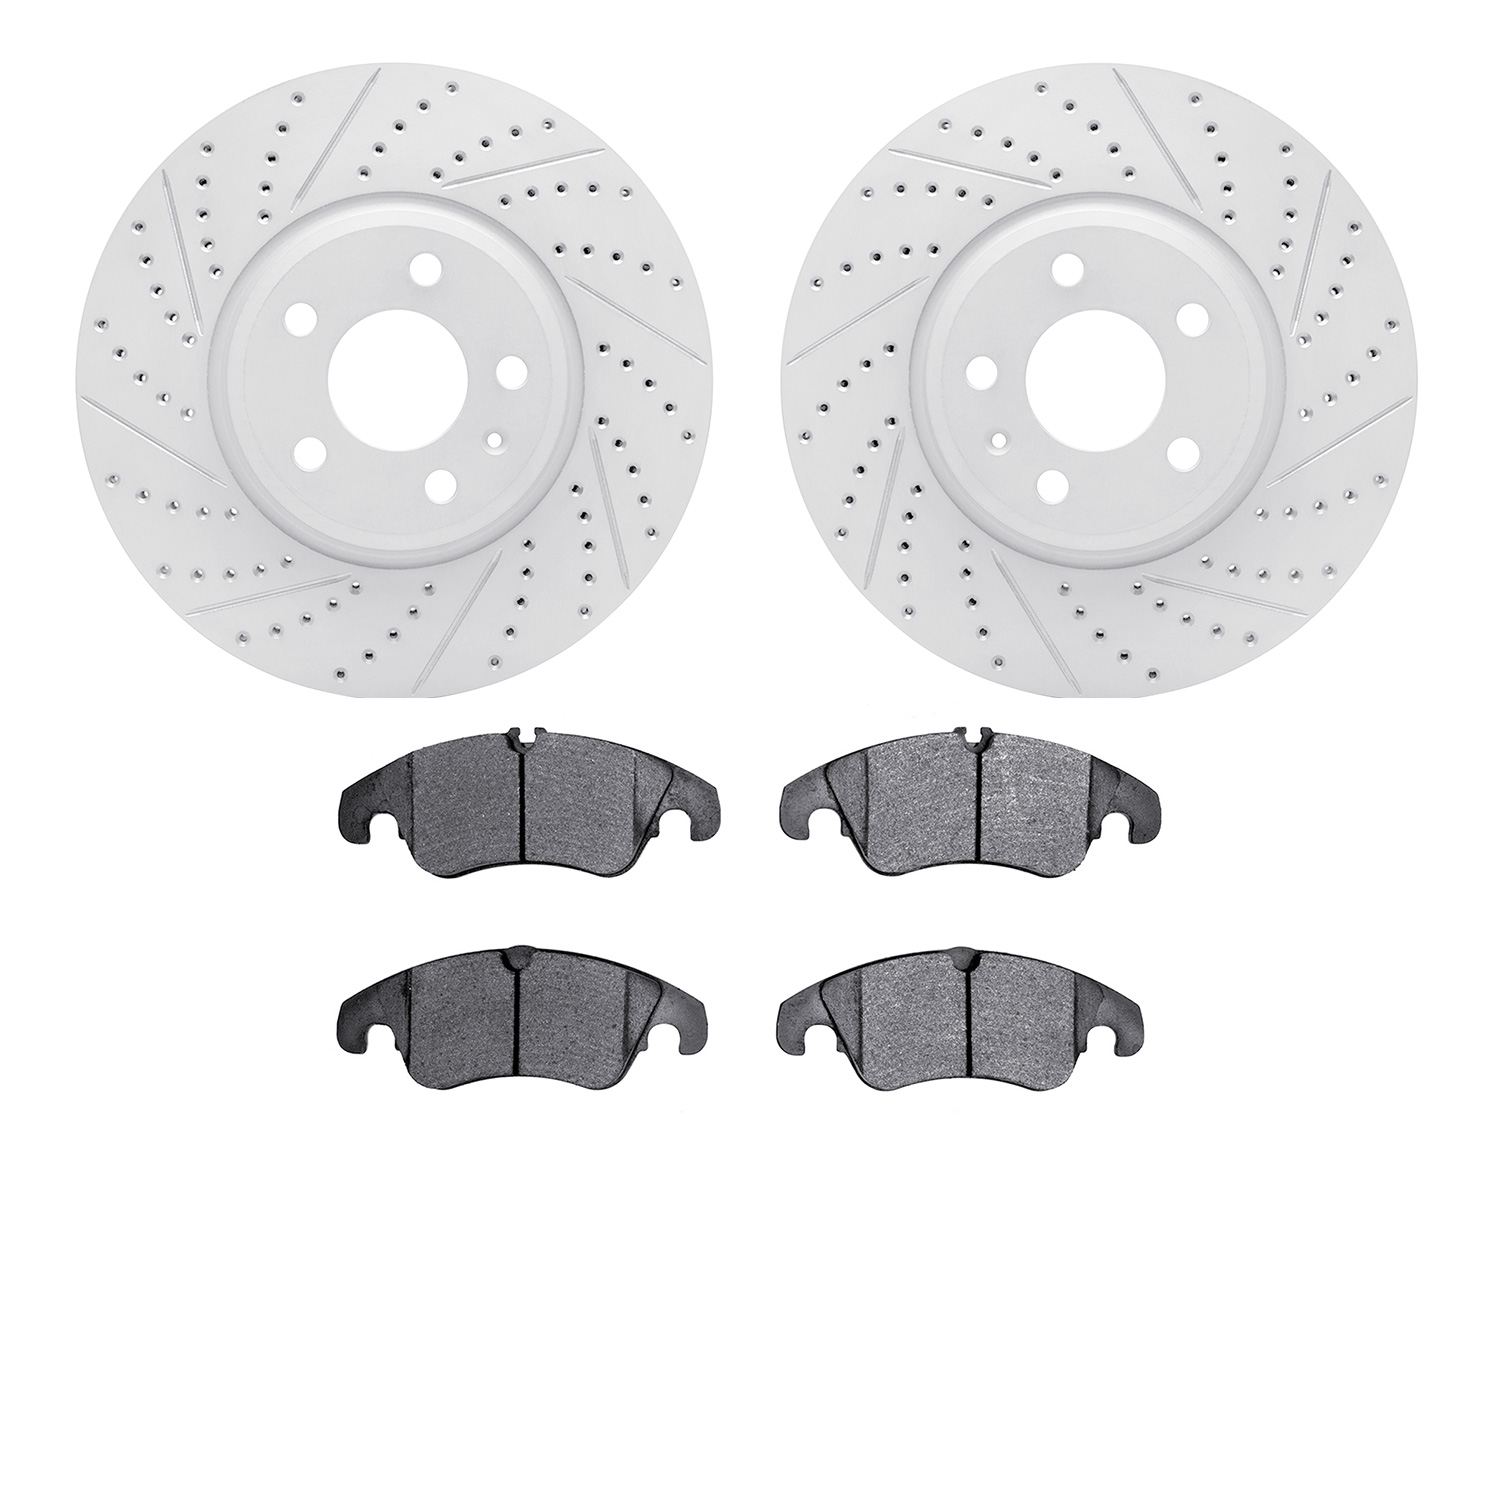 2502-73054 Geoperformance Drilled/Slotted Rotors w/5000 Advanced Brake Pads Kit, 2011-2011 Audi/Volkswagen, Position: Front